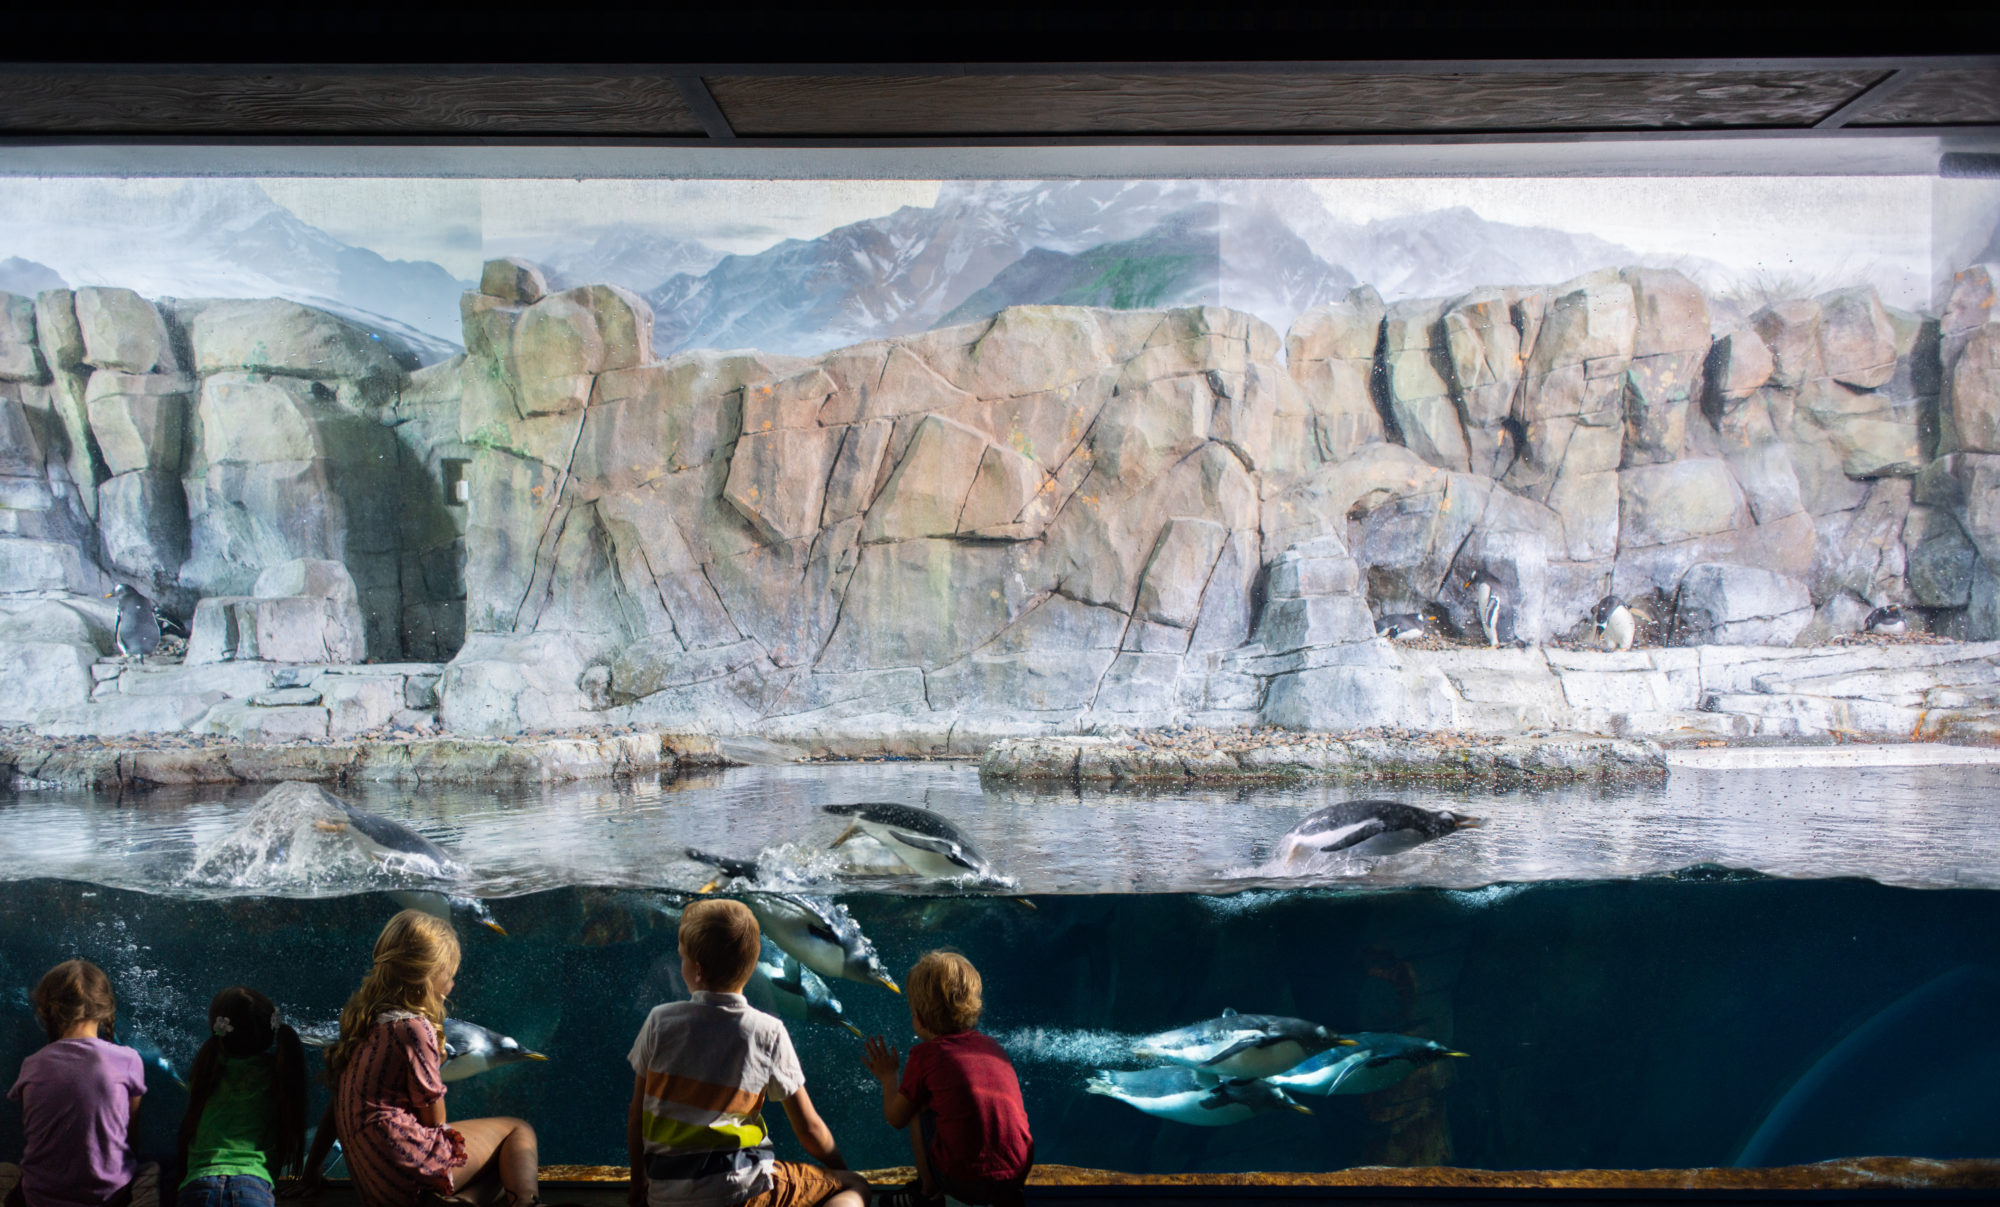 In the April Founder Series, Brent Anderson shares how he achieved a life-long dream of opening the Loveland Living Planet Aquarium.